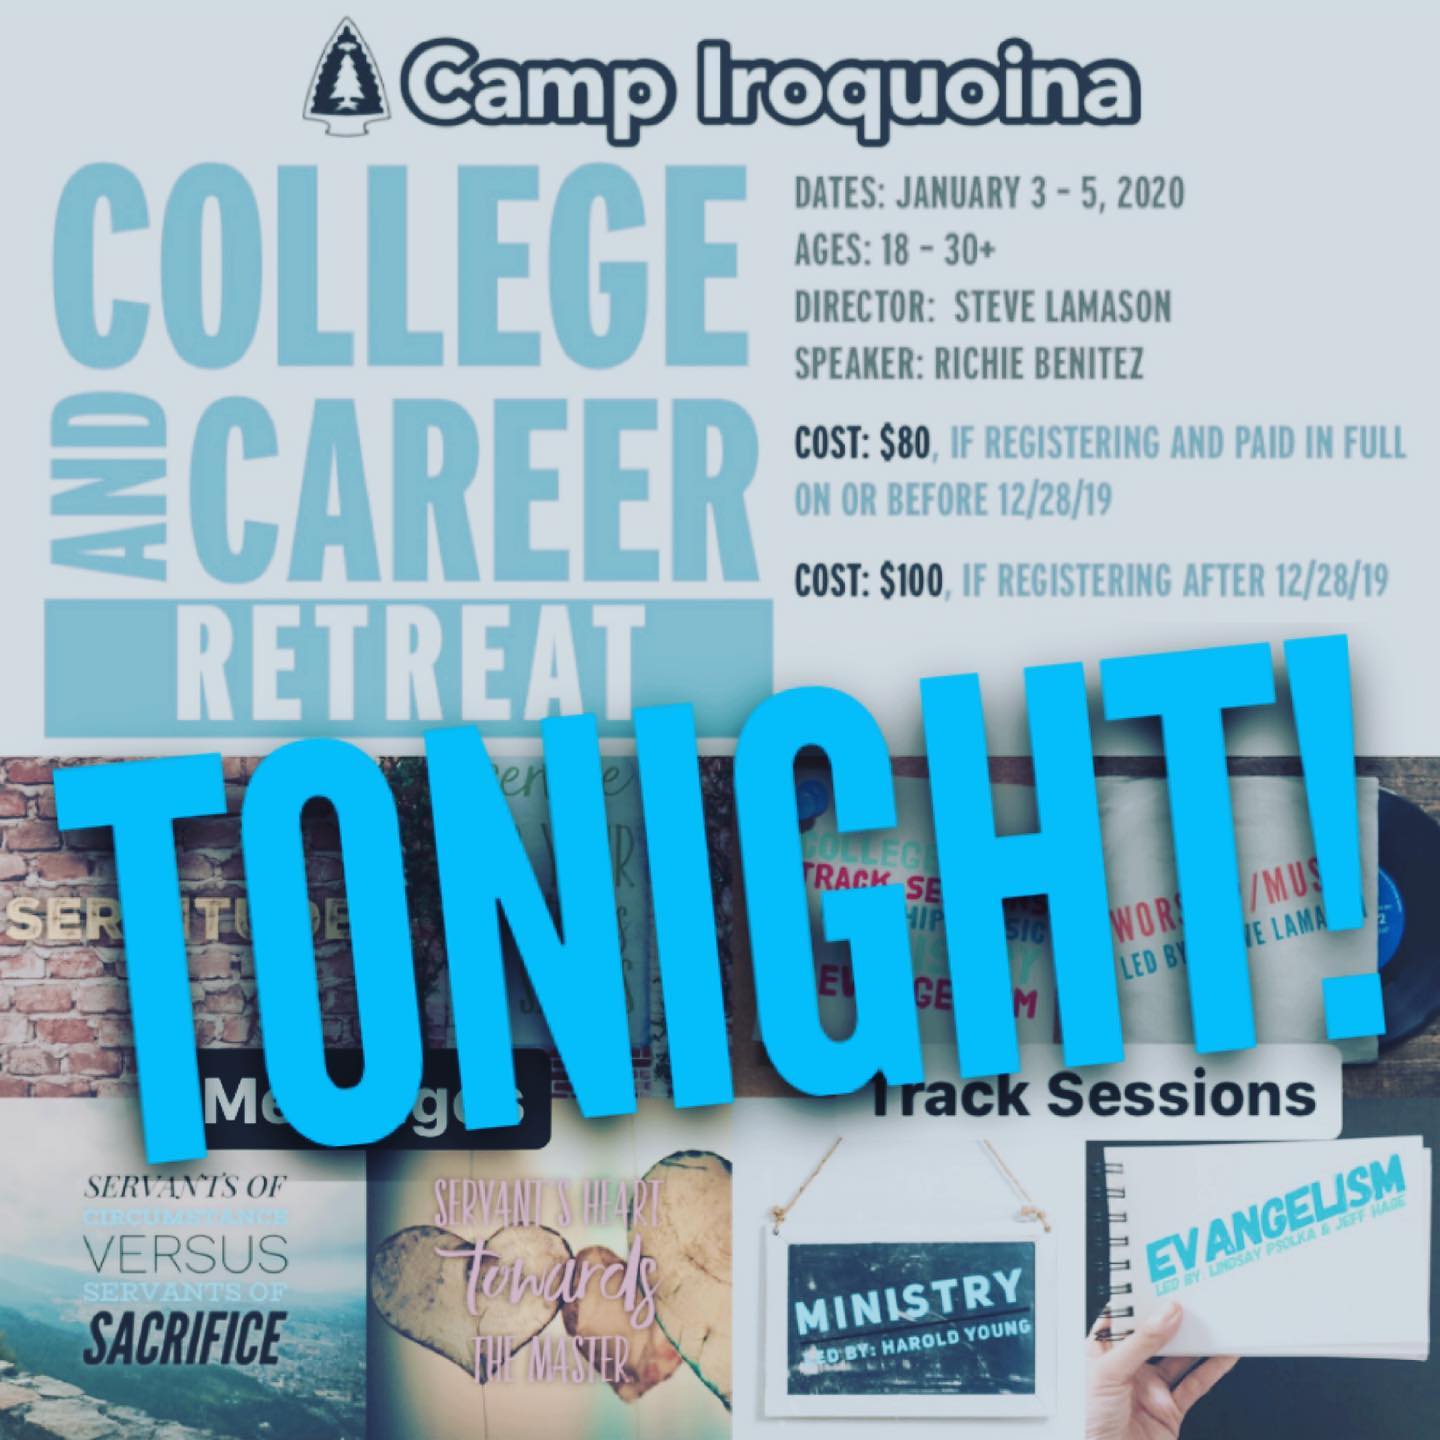 College and Career Retreat starts tonight! Check-in @ 8pm! Pray for a great weekend of growth, encouragement, fun, and safety. Please also pray for safety for everyone traveling up! #campiroquoina #winteretreats2020 #retreats #iroqcnc2020 #winterishere️